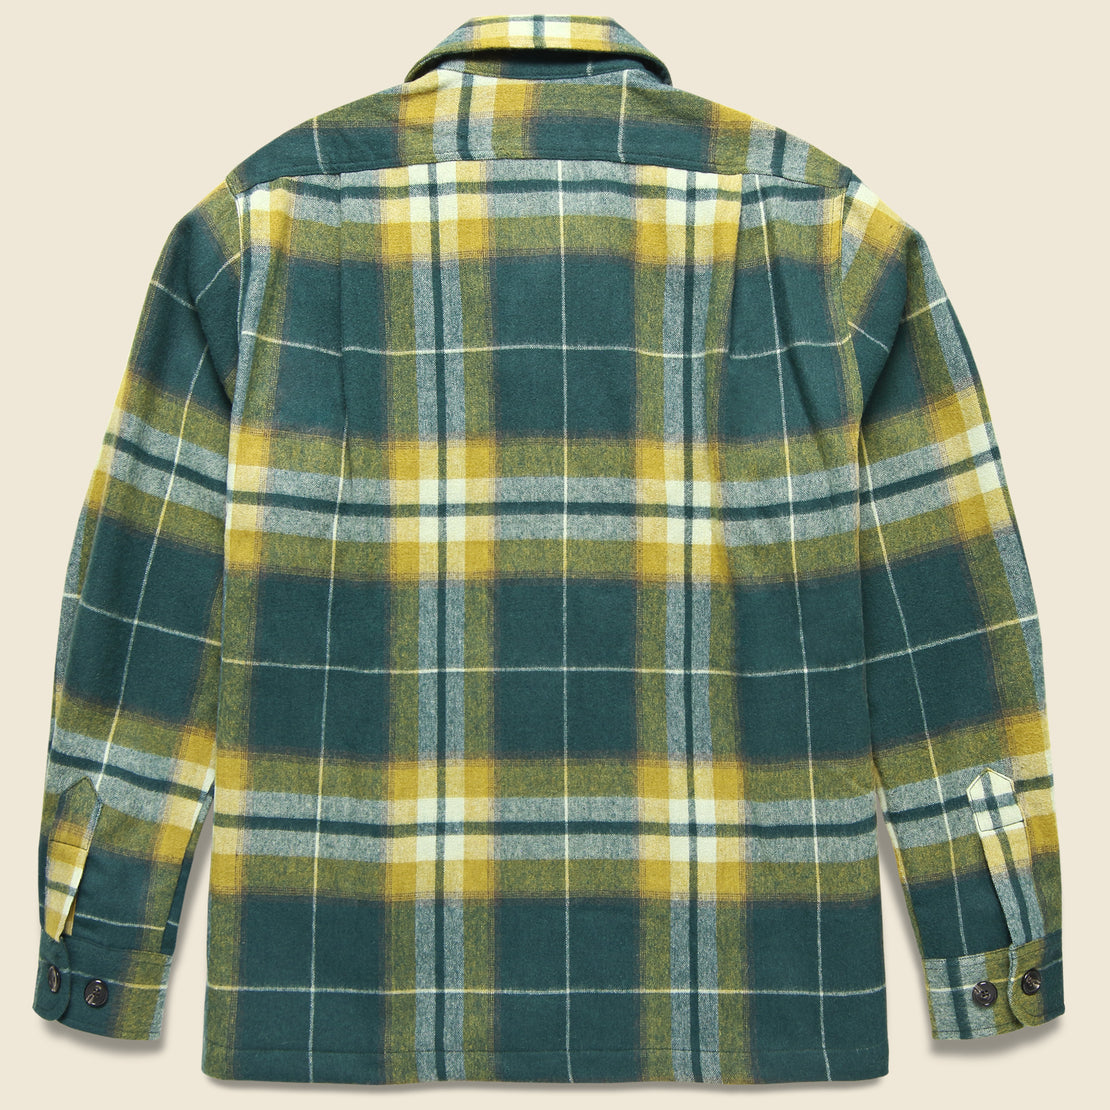 Ombre Plaid Military Shirt Jacket - Green - Corridor - STAG Provisions - Outerwear - Shirt Jacket